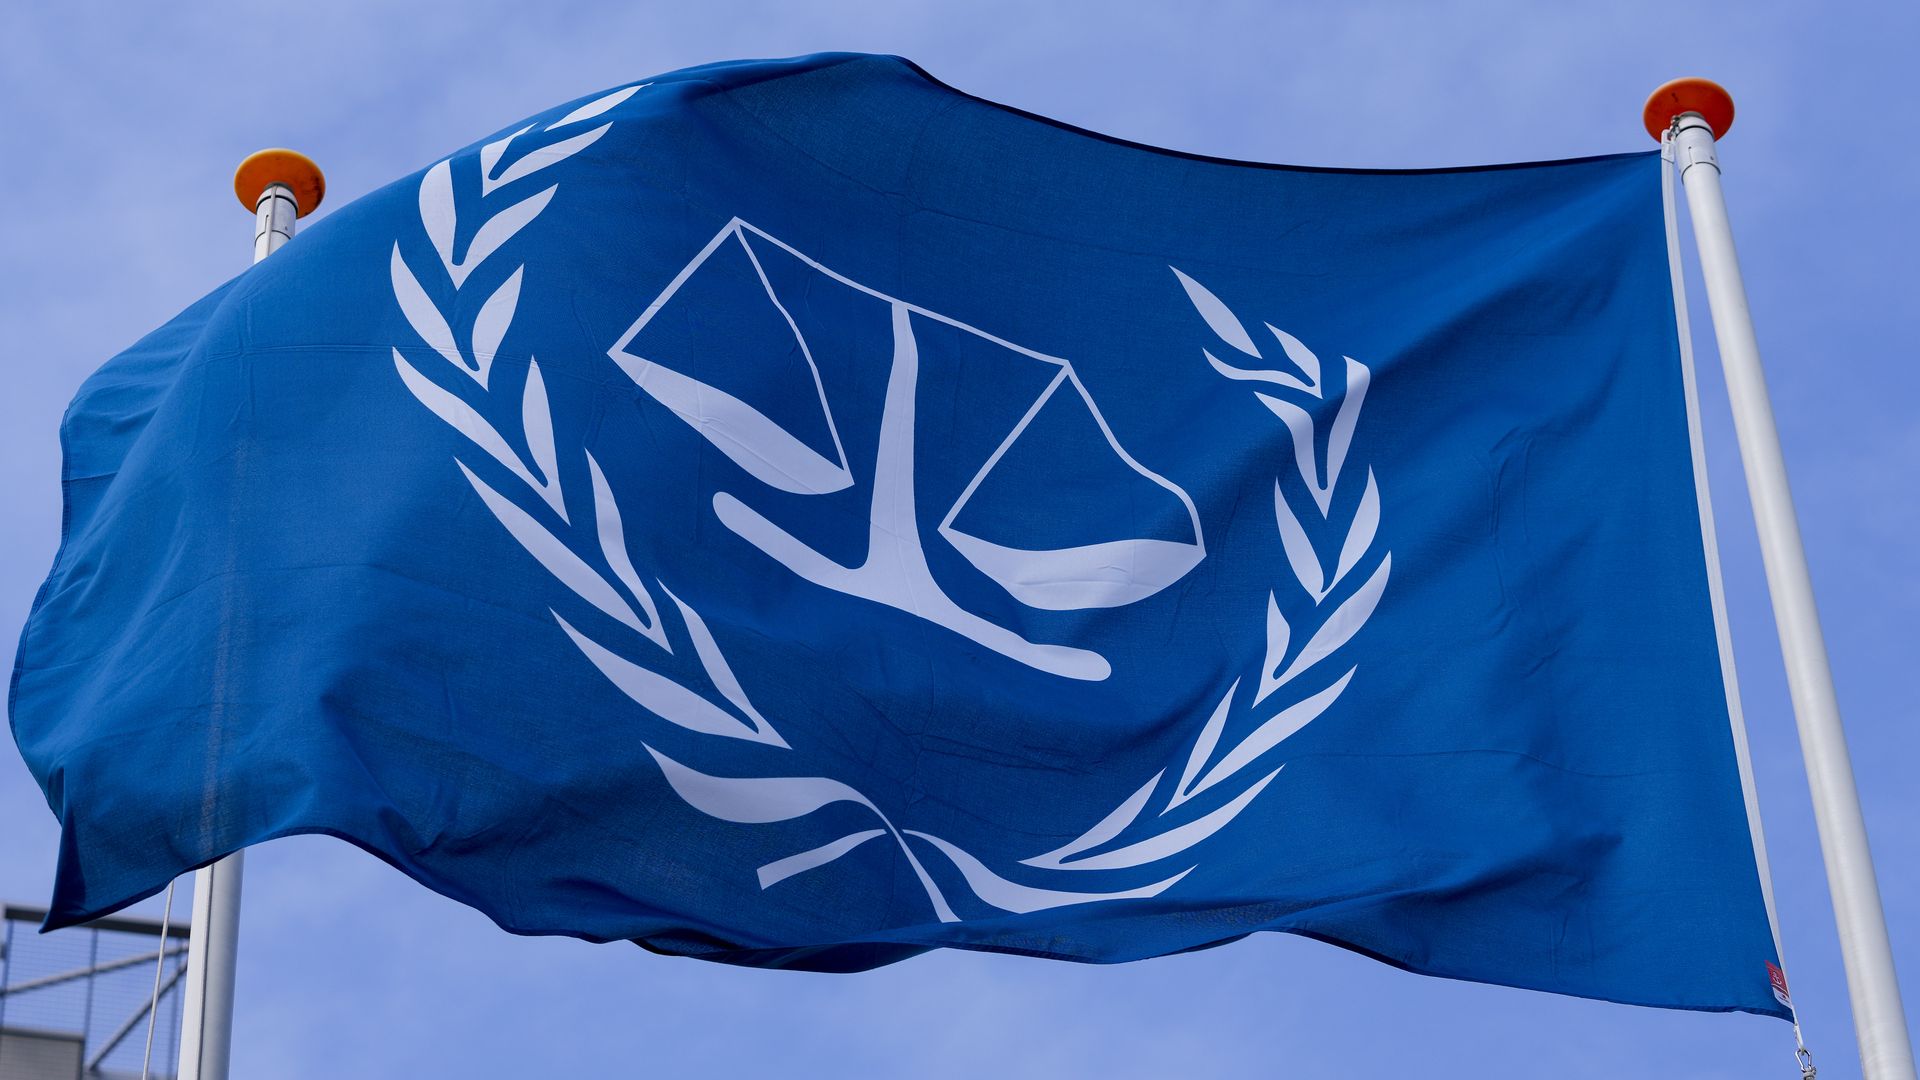 A flag with the logo of the International Criminal Court in March 2022 in Den Haag, Netherlands.